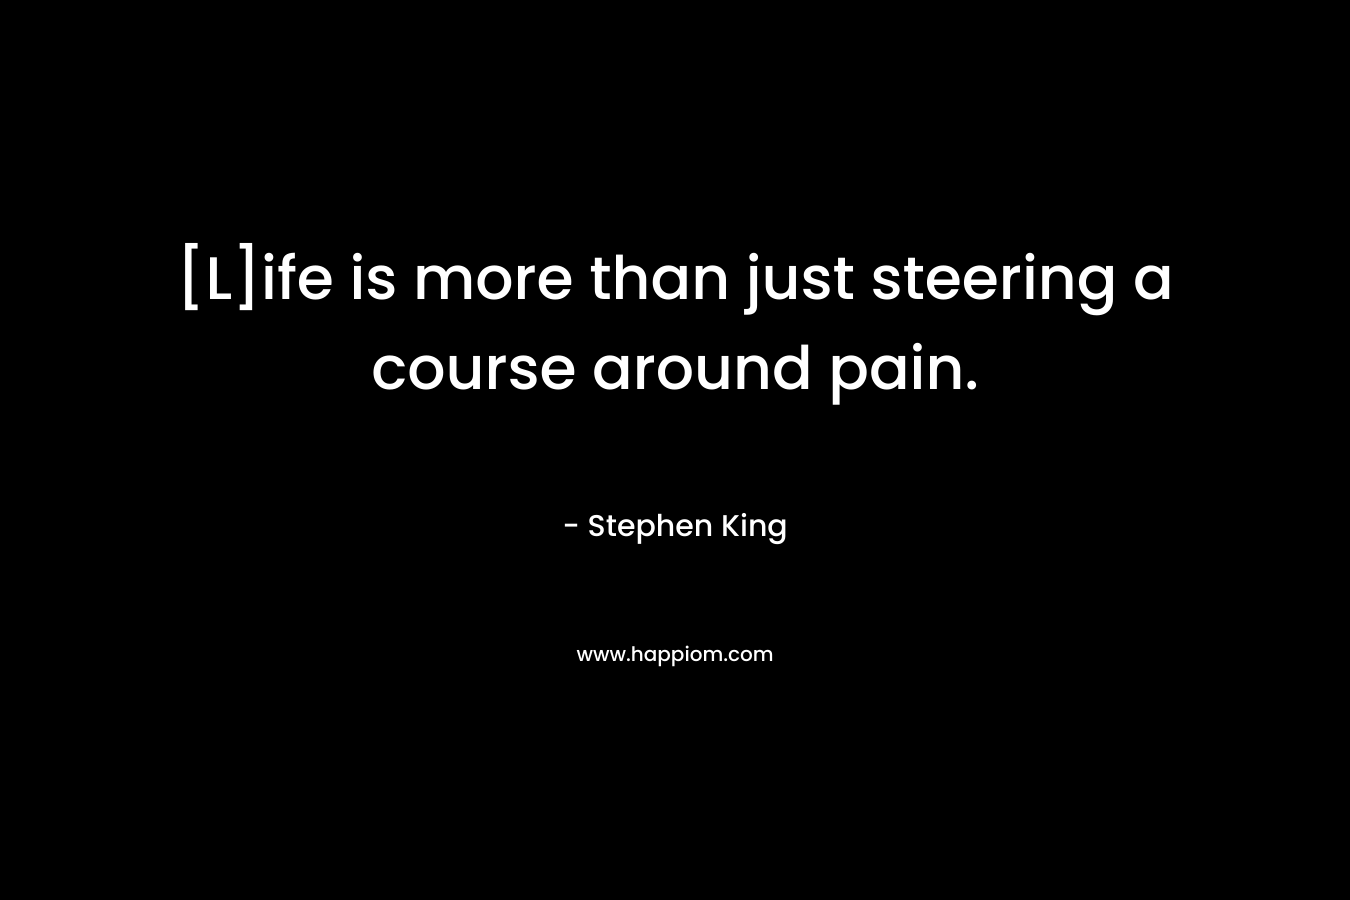 [L]ife is more than just steering a course around pain.